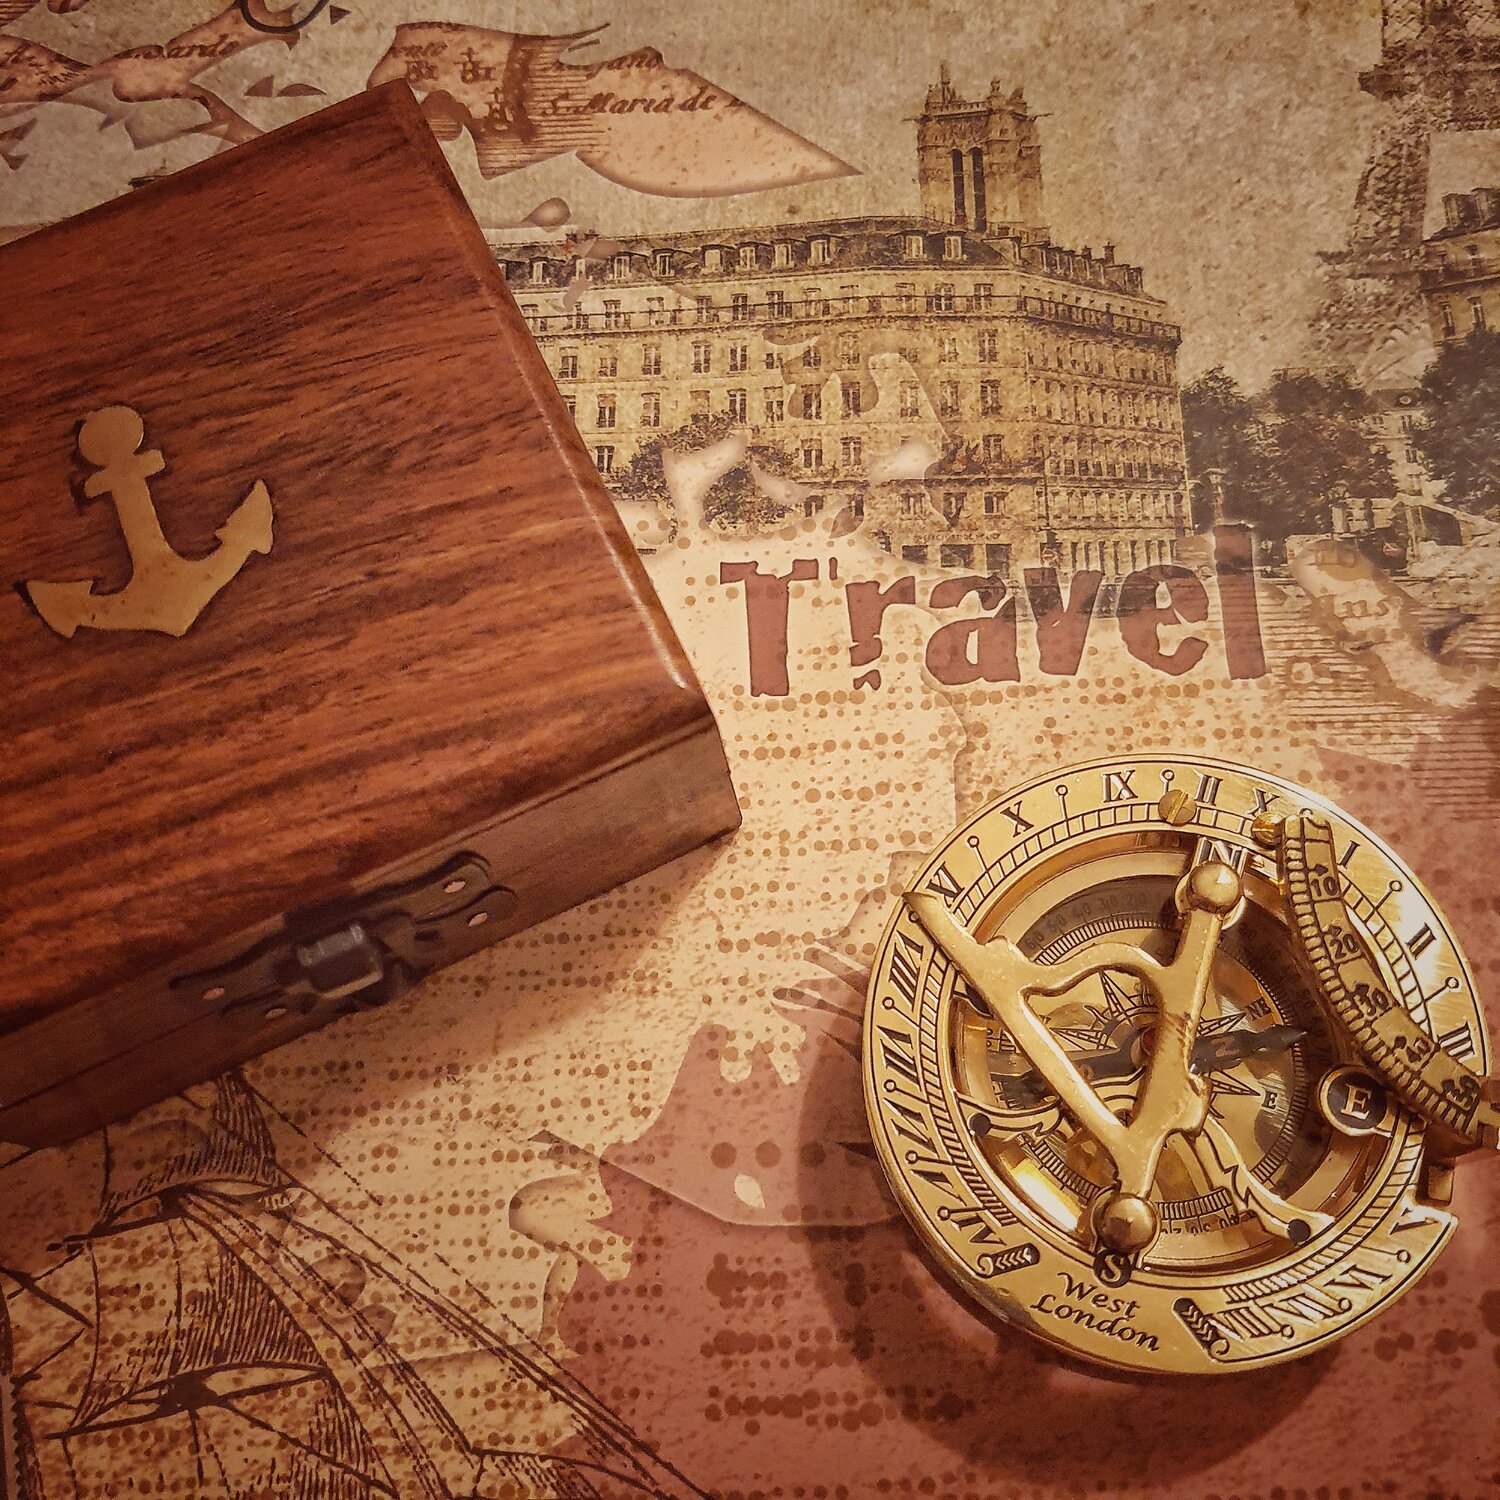 Handmade Brass Box Sundial Compass With Personalized Custom Text